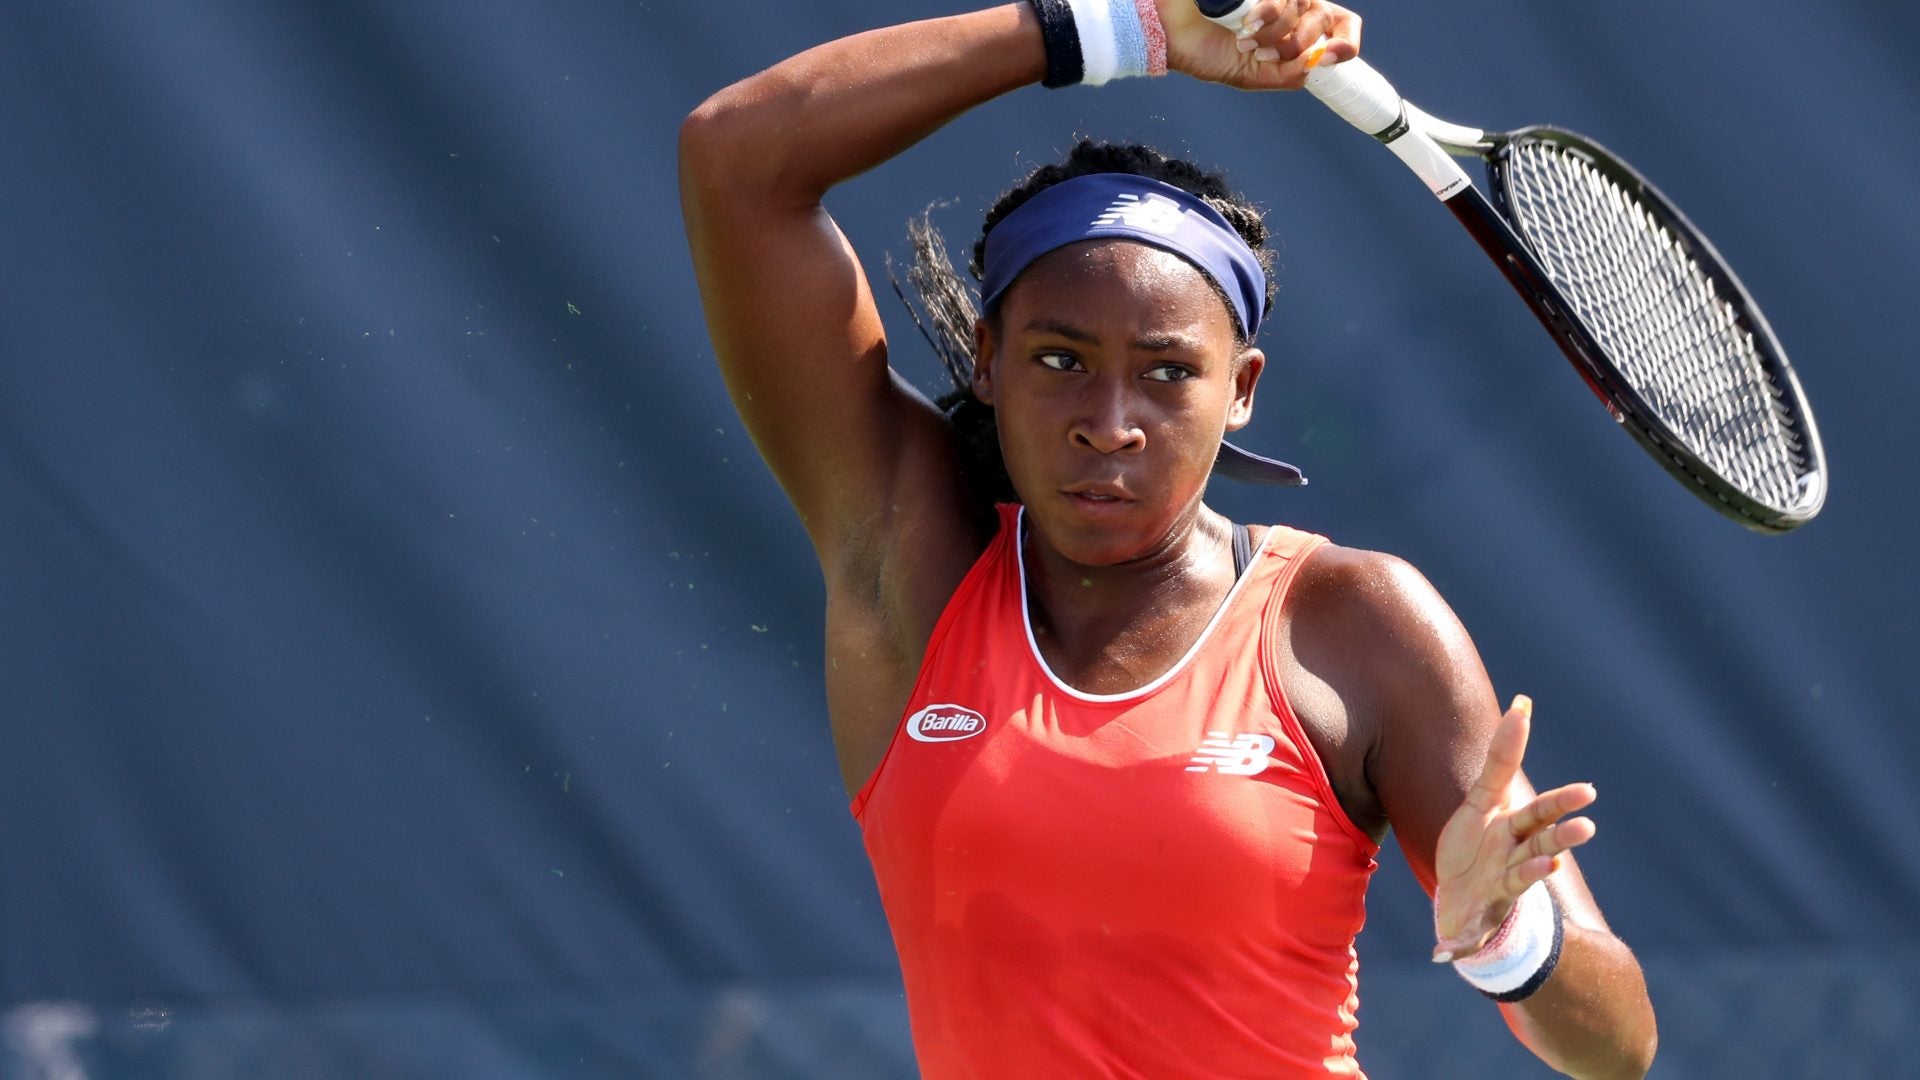 15-Year-Old Cori Gauff Given Wild Card Entry To US Open